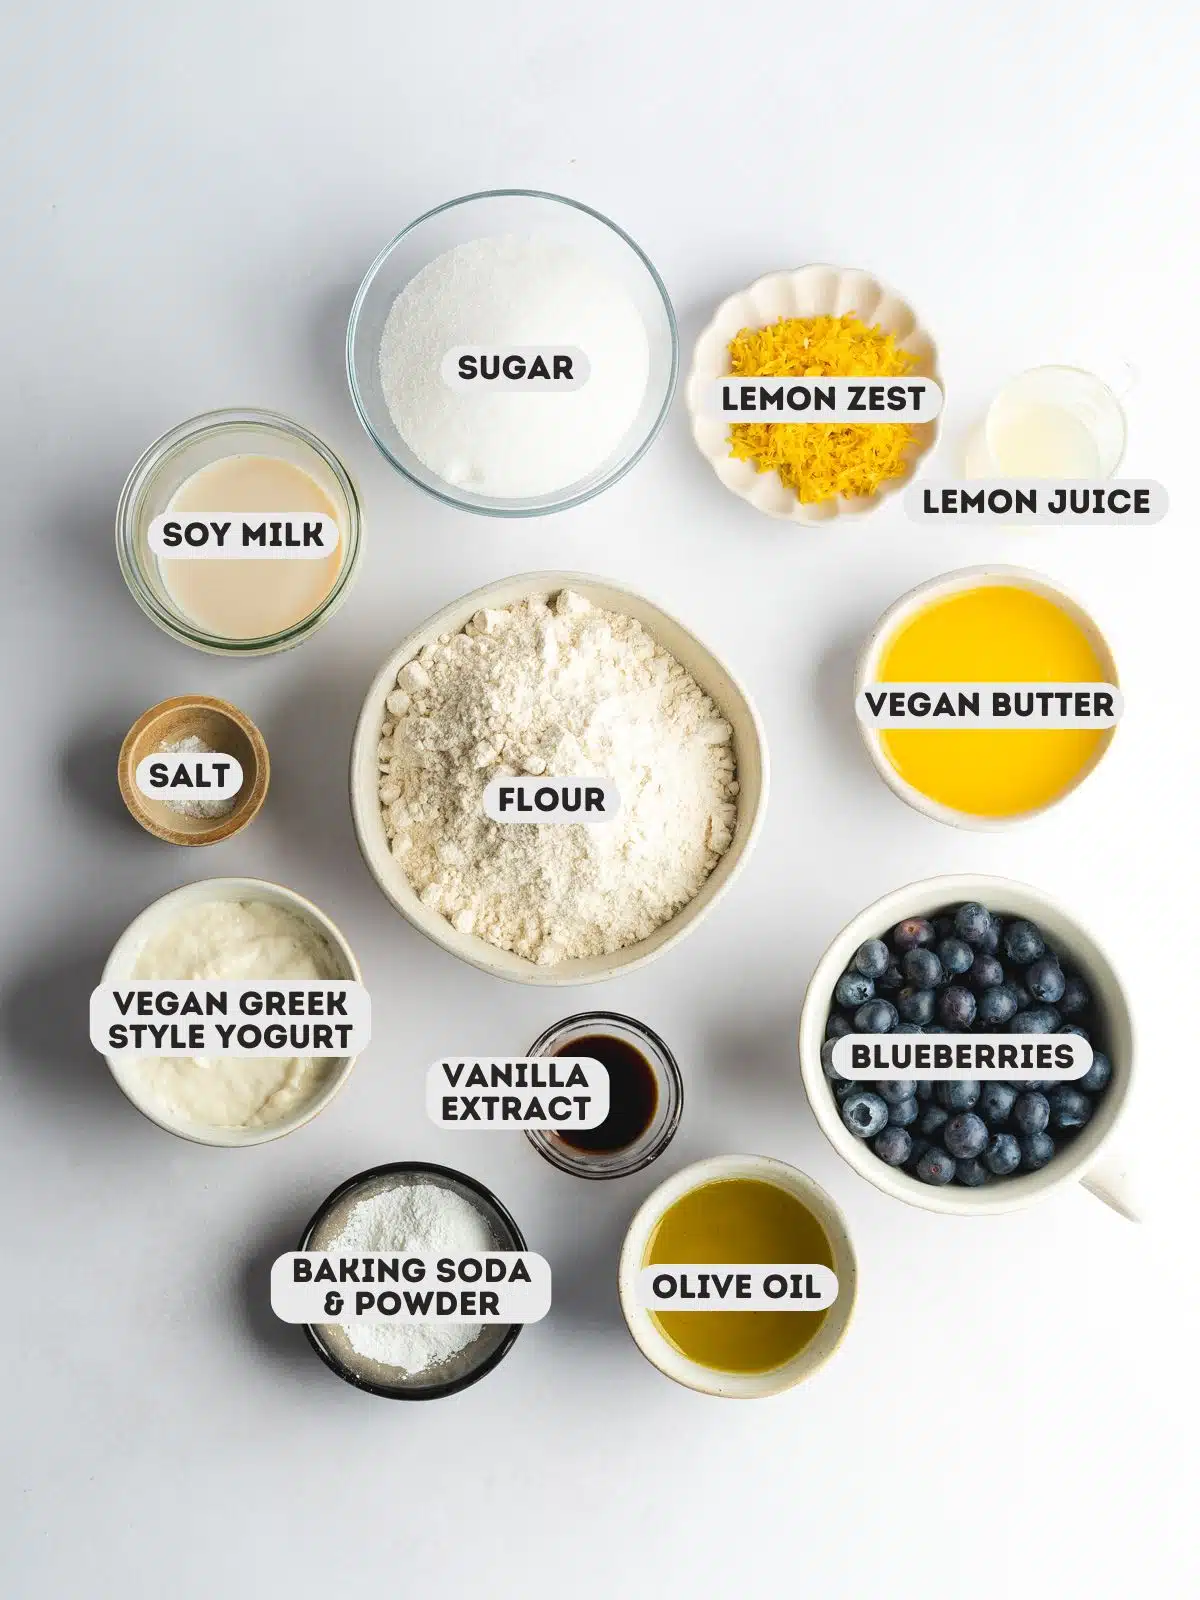 ingredients for vegan blueberry lemon cake measured out in bowls on a light gray surface.